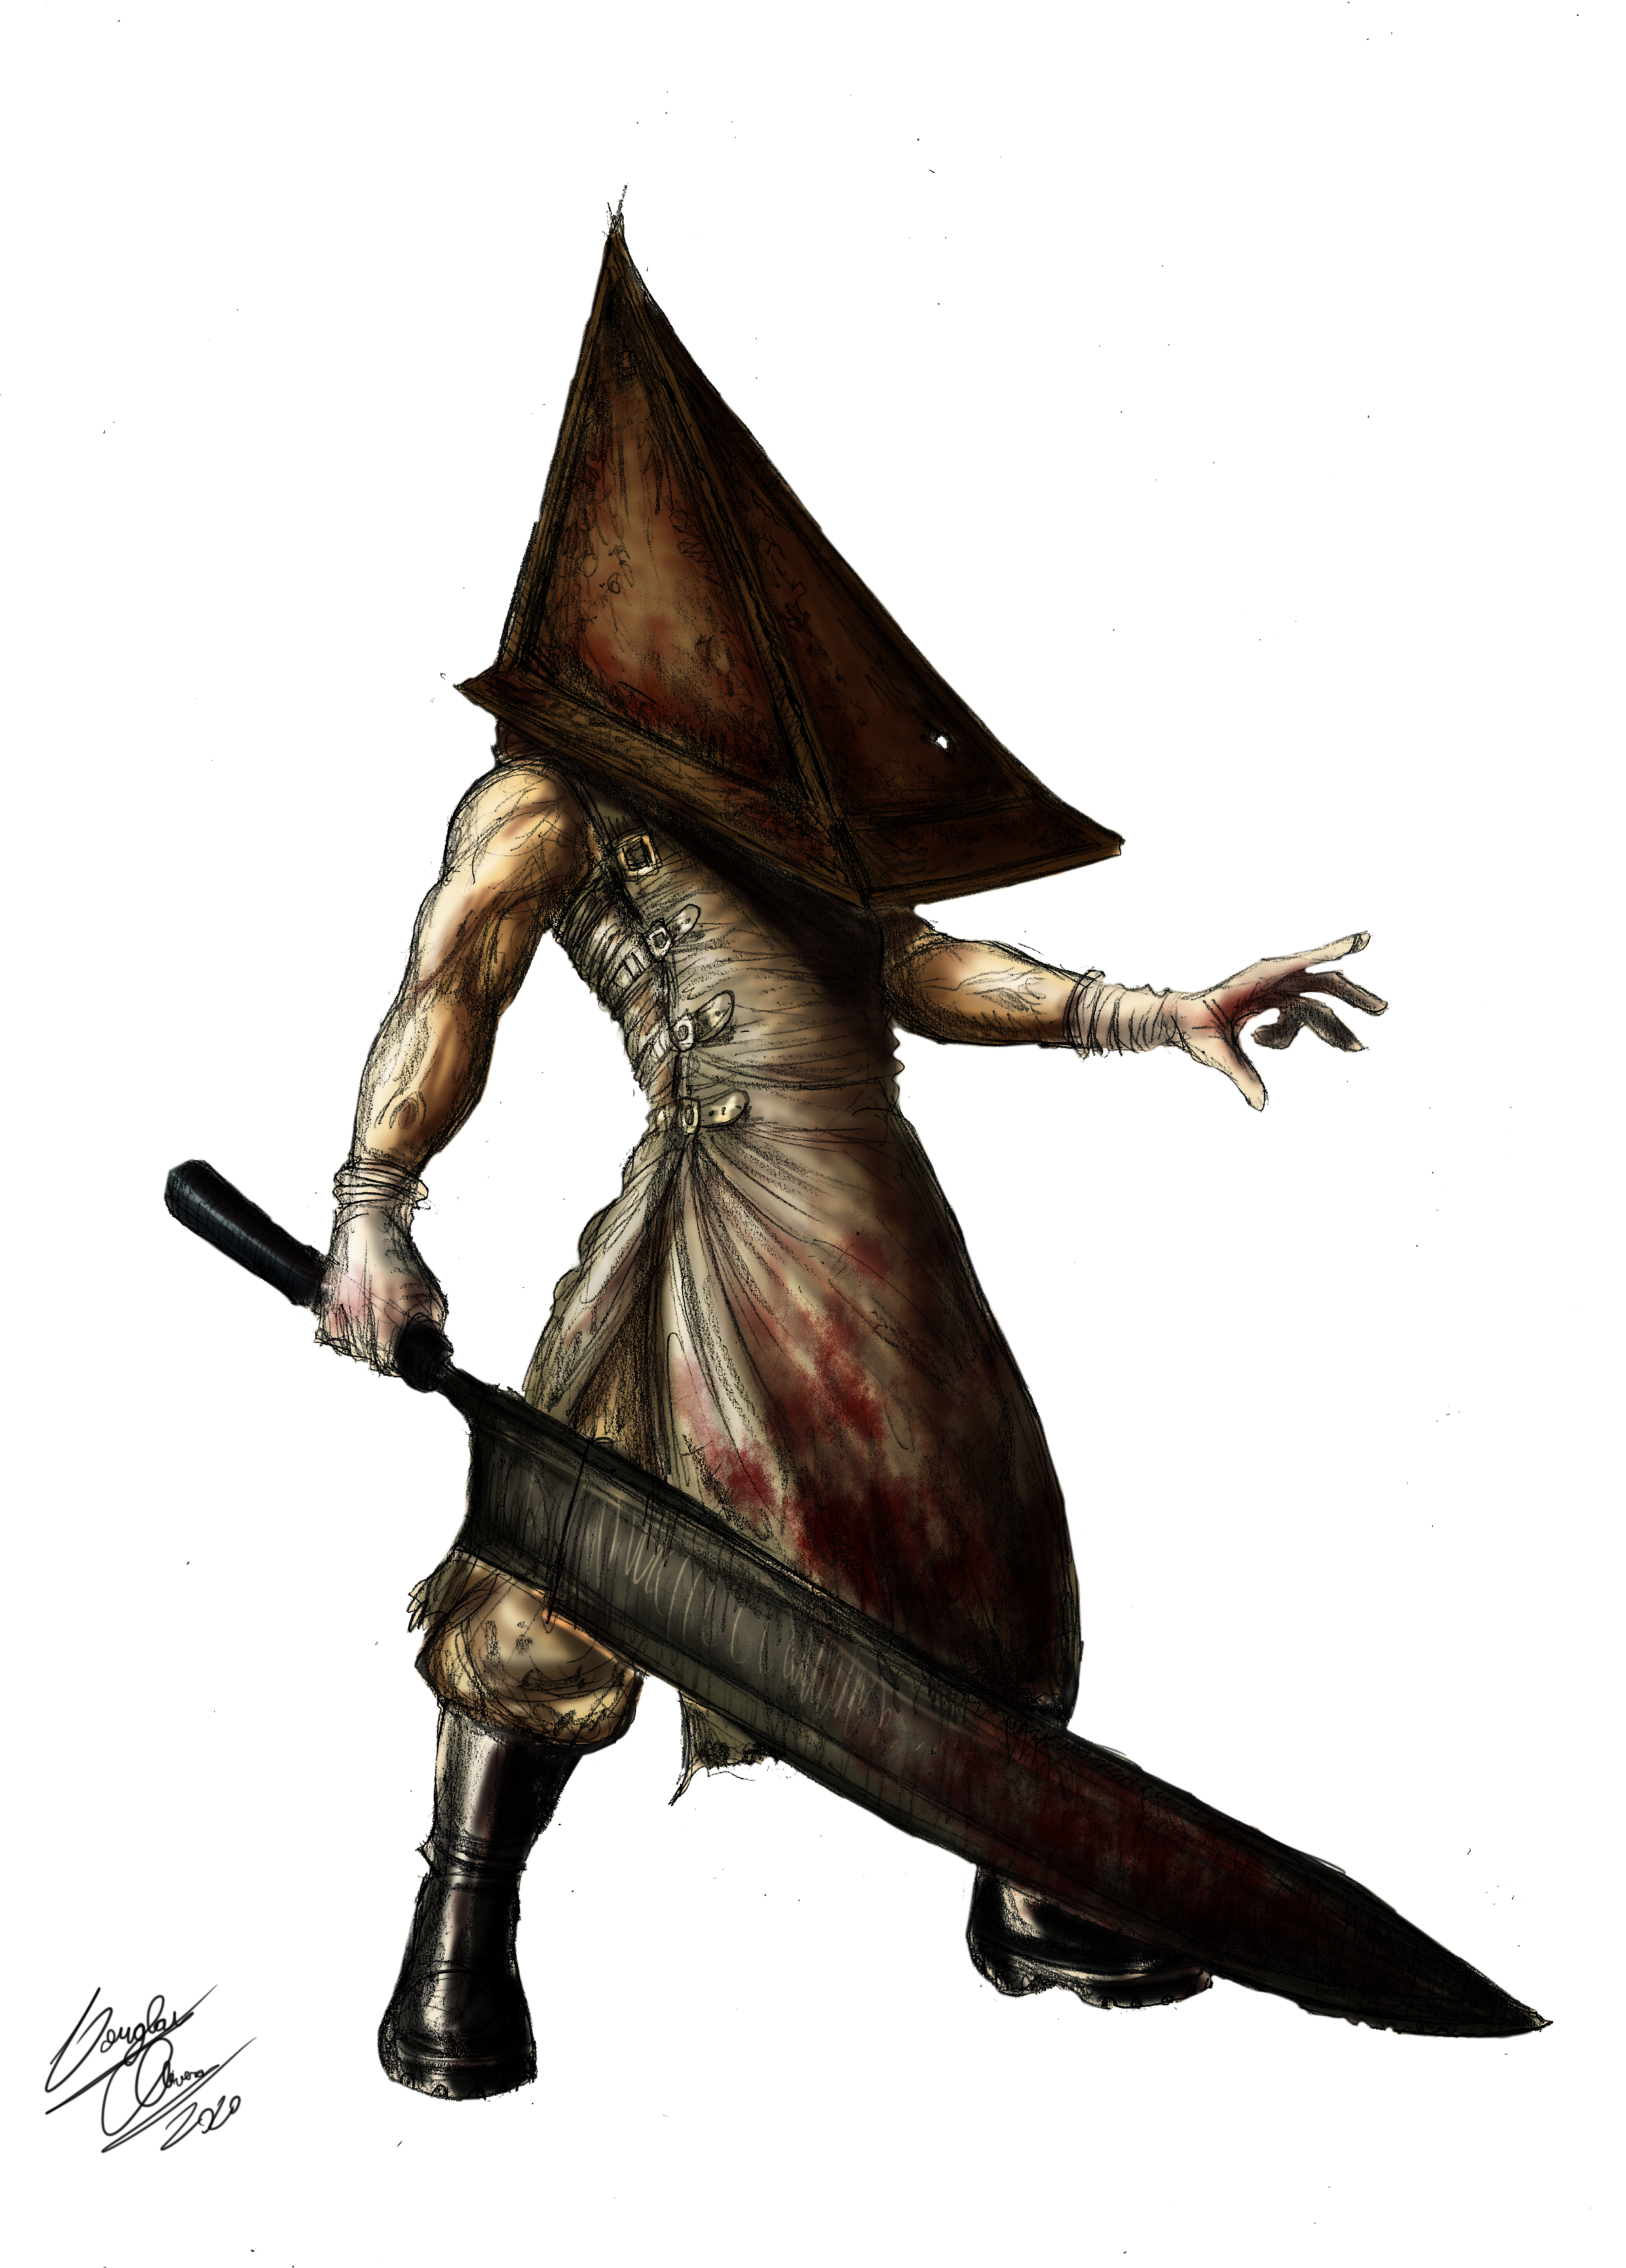 Pyramid Head png images